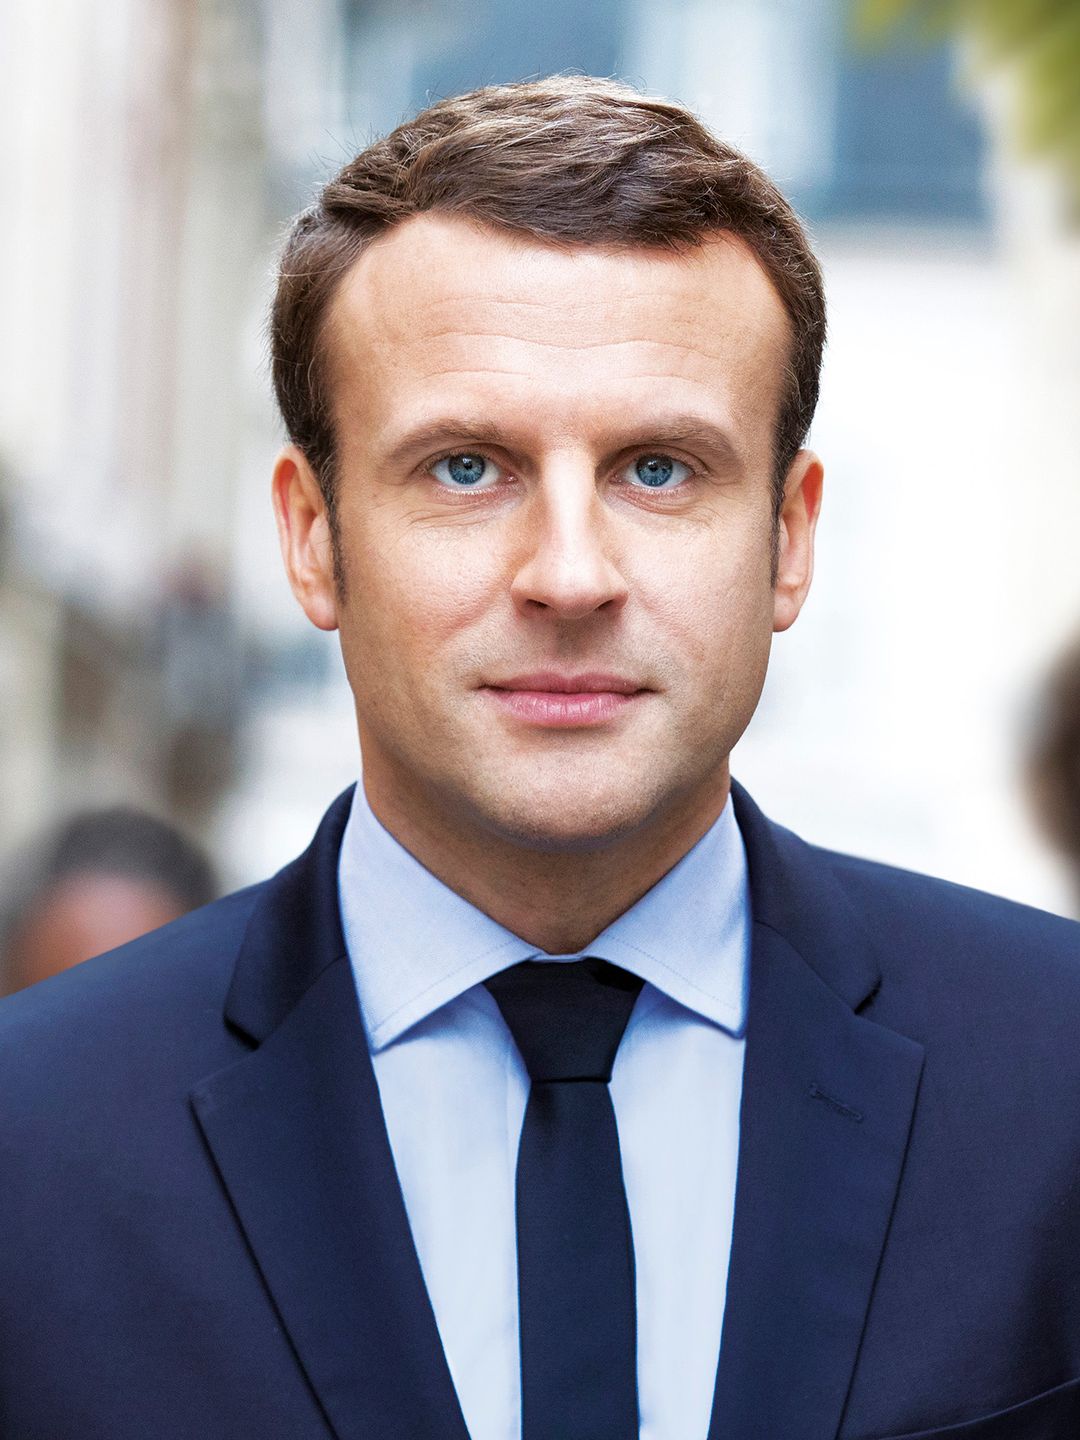 Emmanuel Macron who is his father